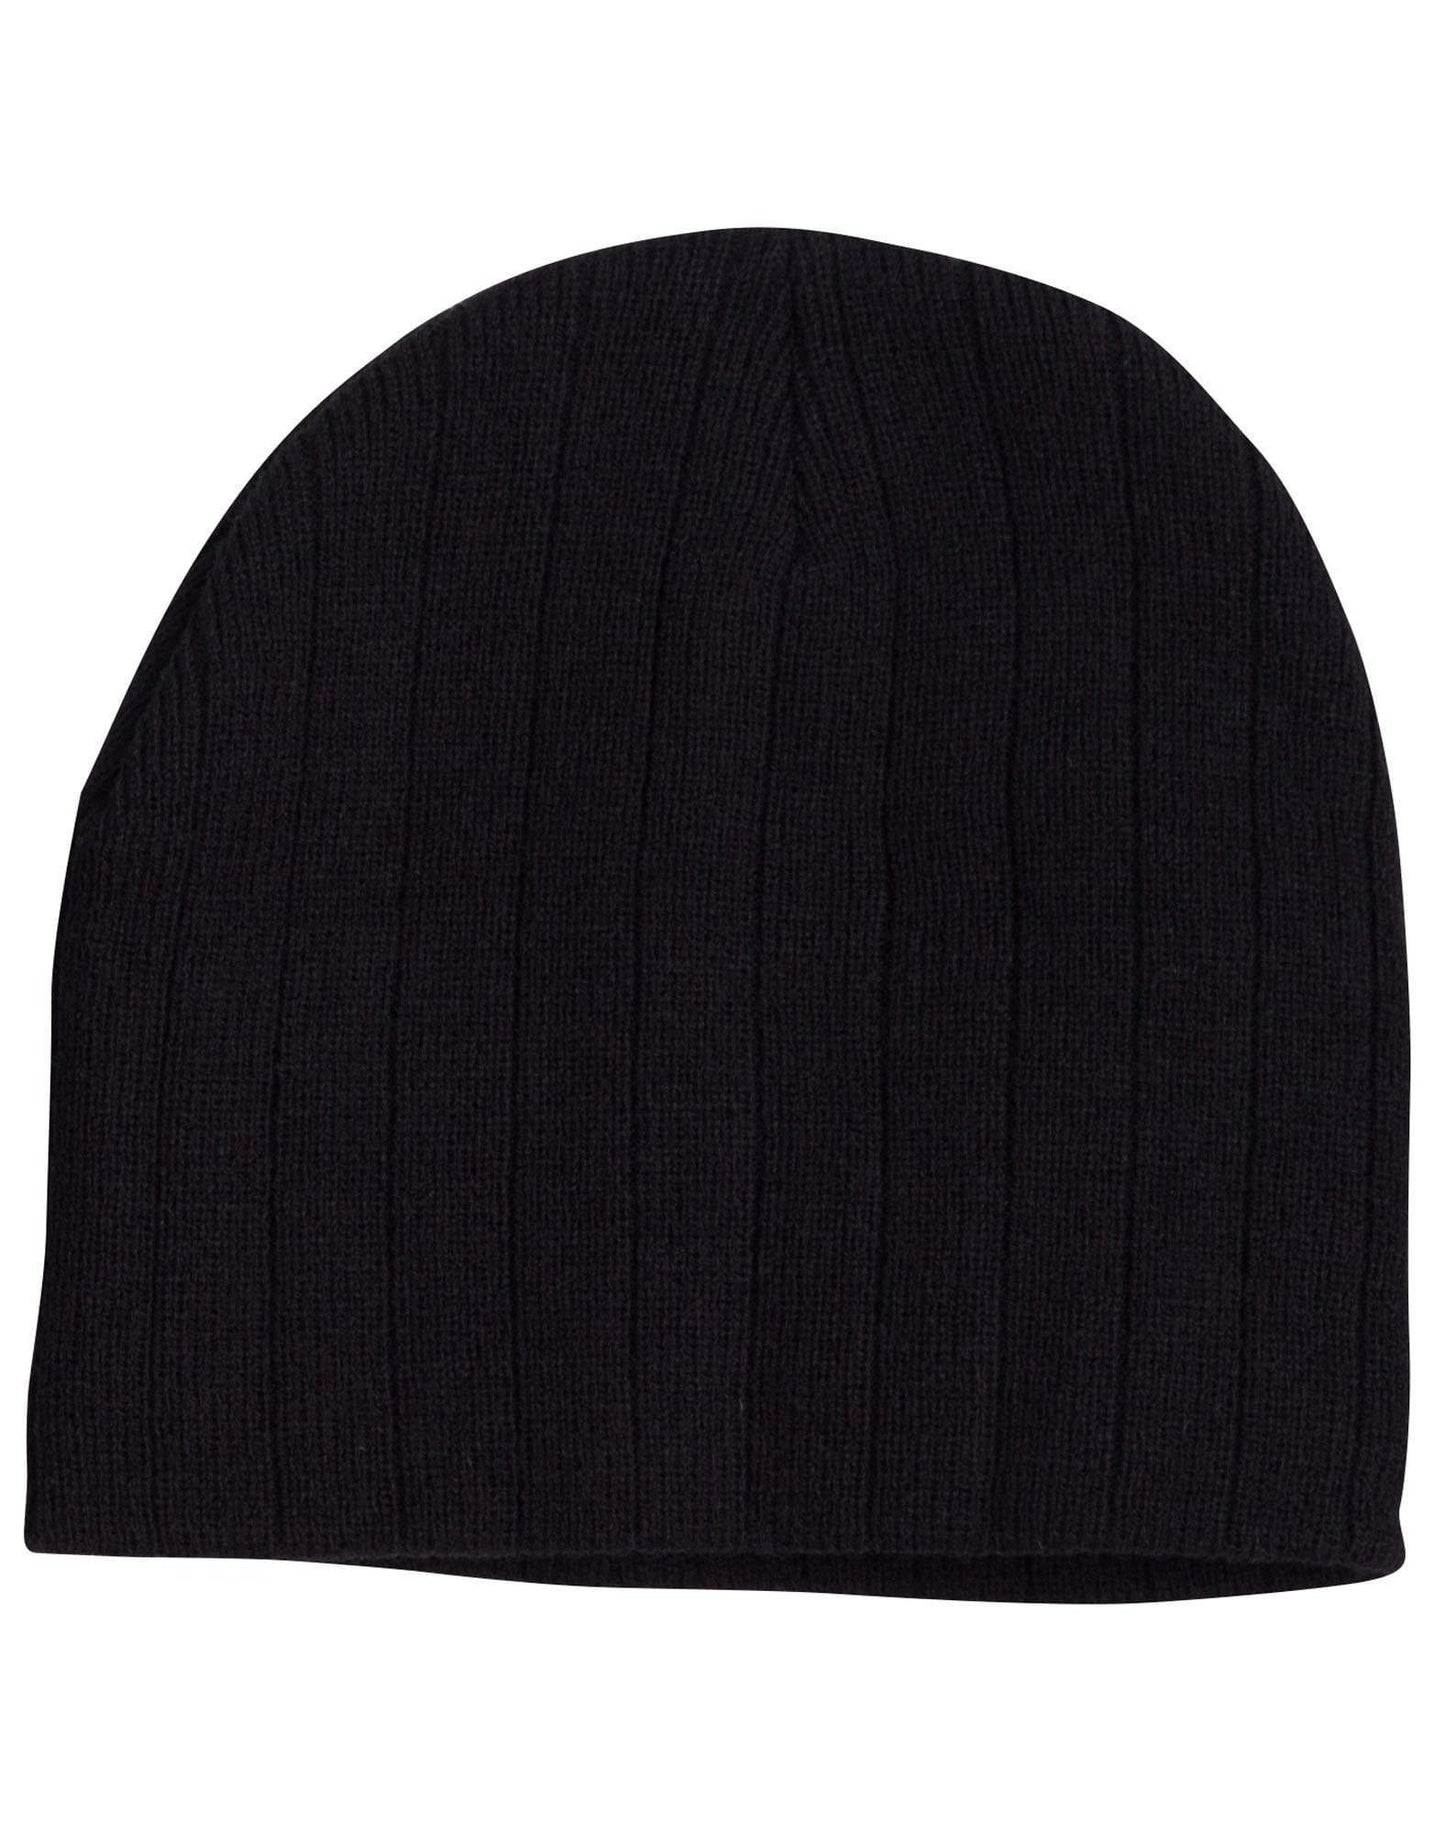 Cable Knit Beanie With Fleece Head BandCH64 Active Wear Winning Spirit Black One size 